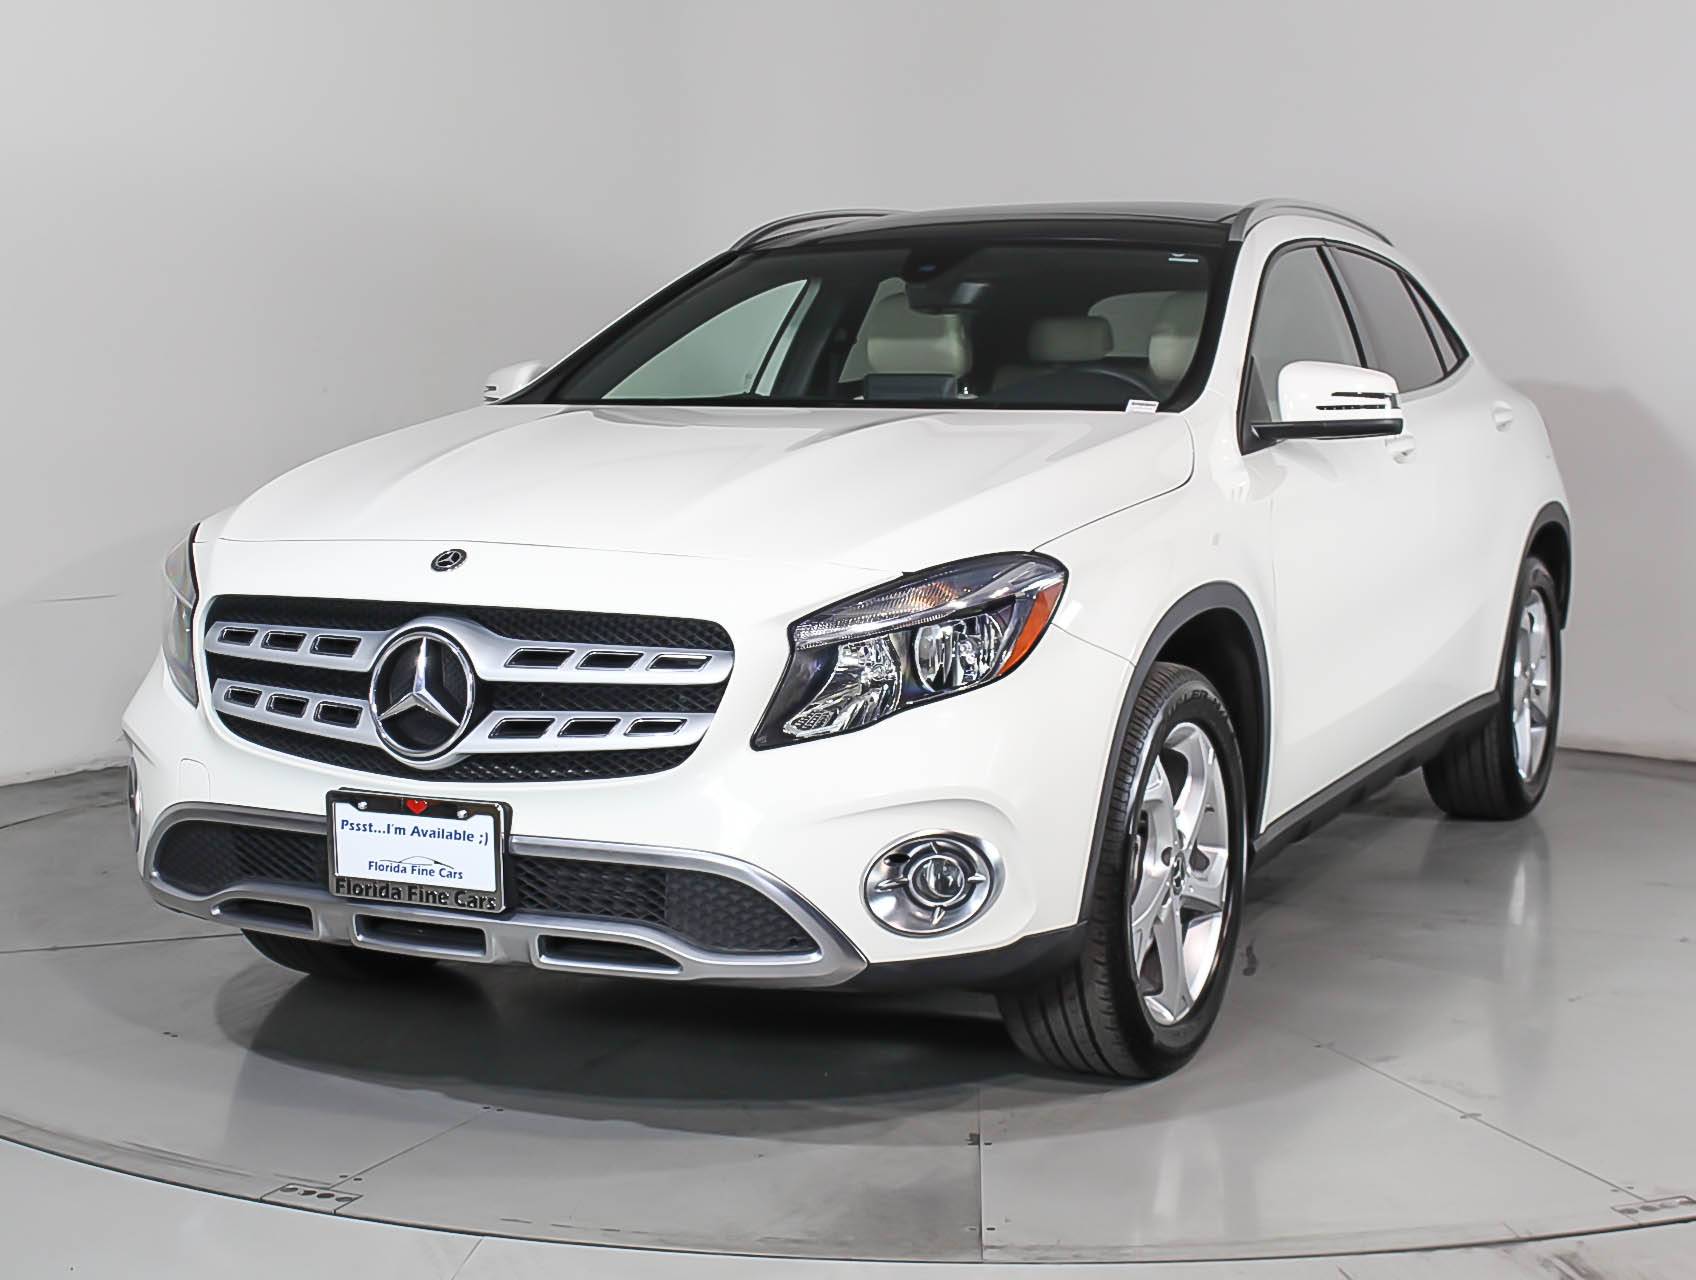 Used 18 Mercedes Benz Gla Class Gla250 4matic Suv For Sale In West Palm Fl Florida Fine Cars